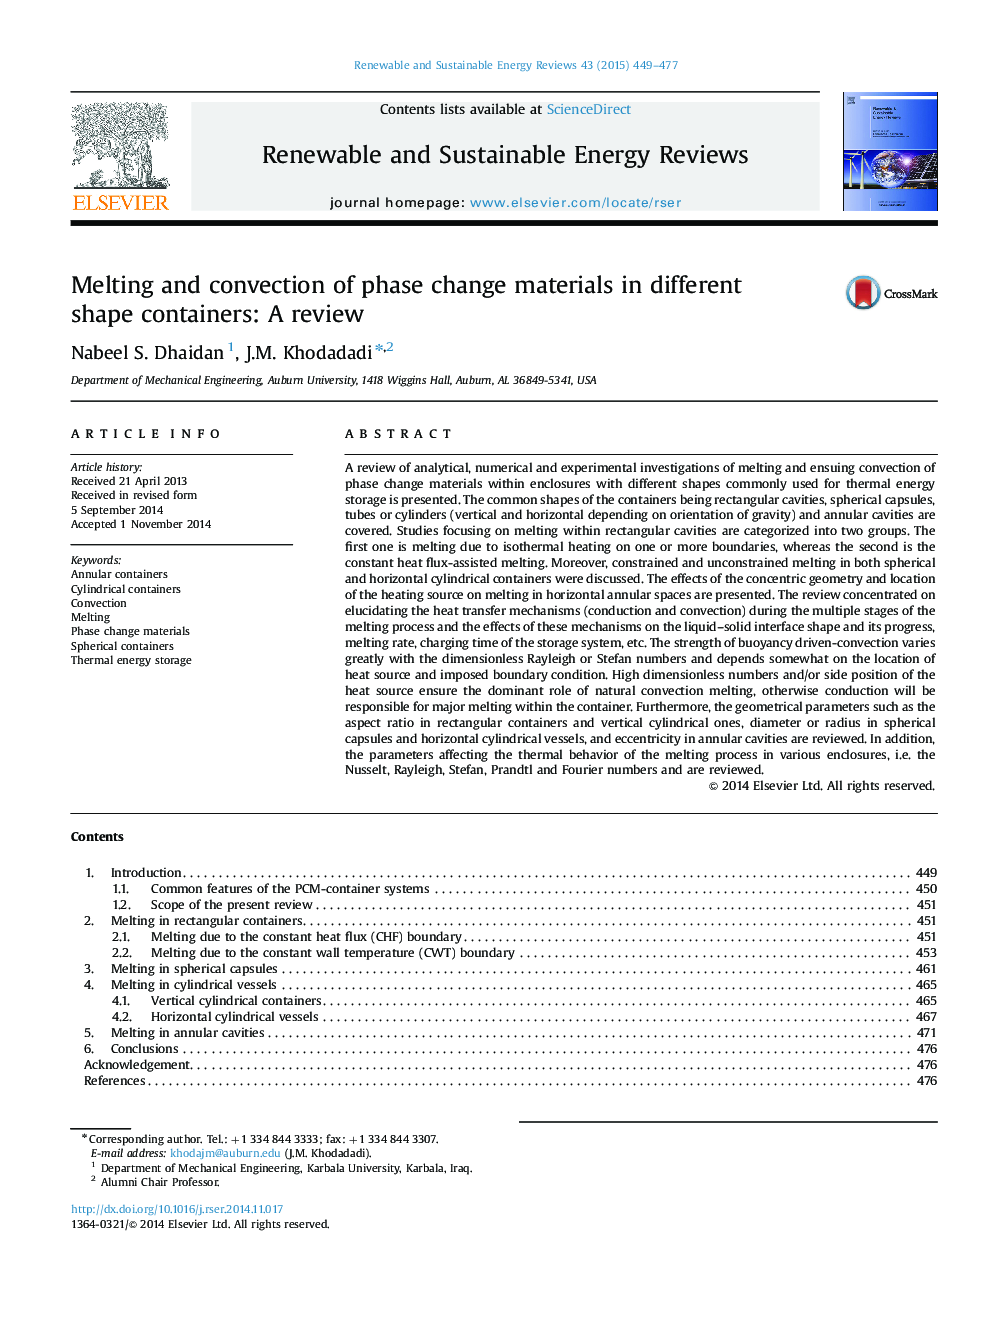 Melting and convection of phase change materials in different shape containers: A review